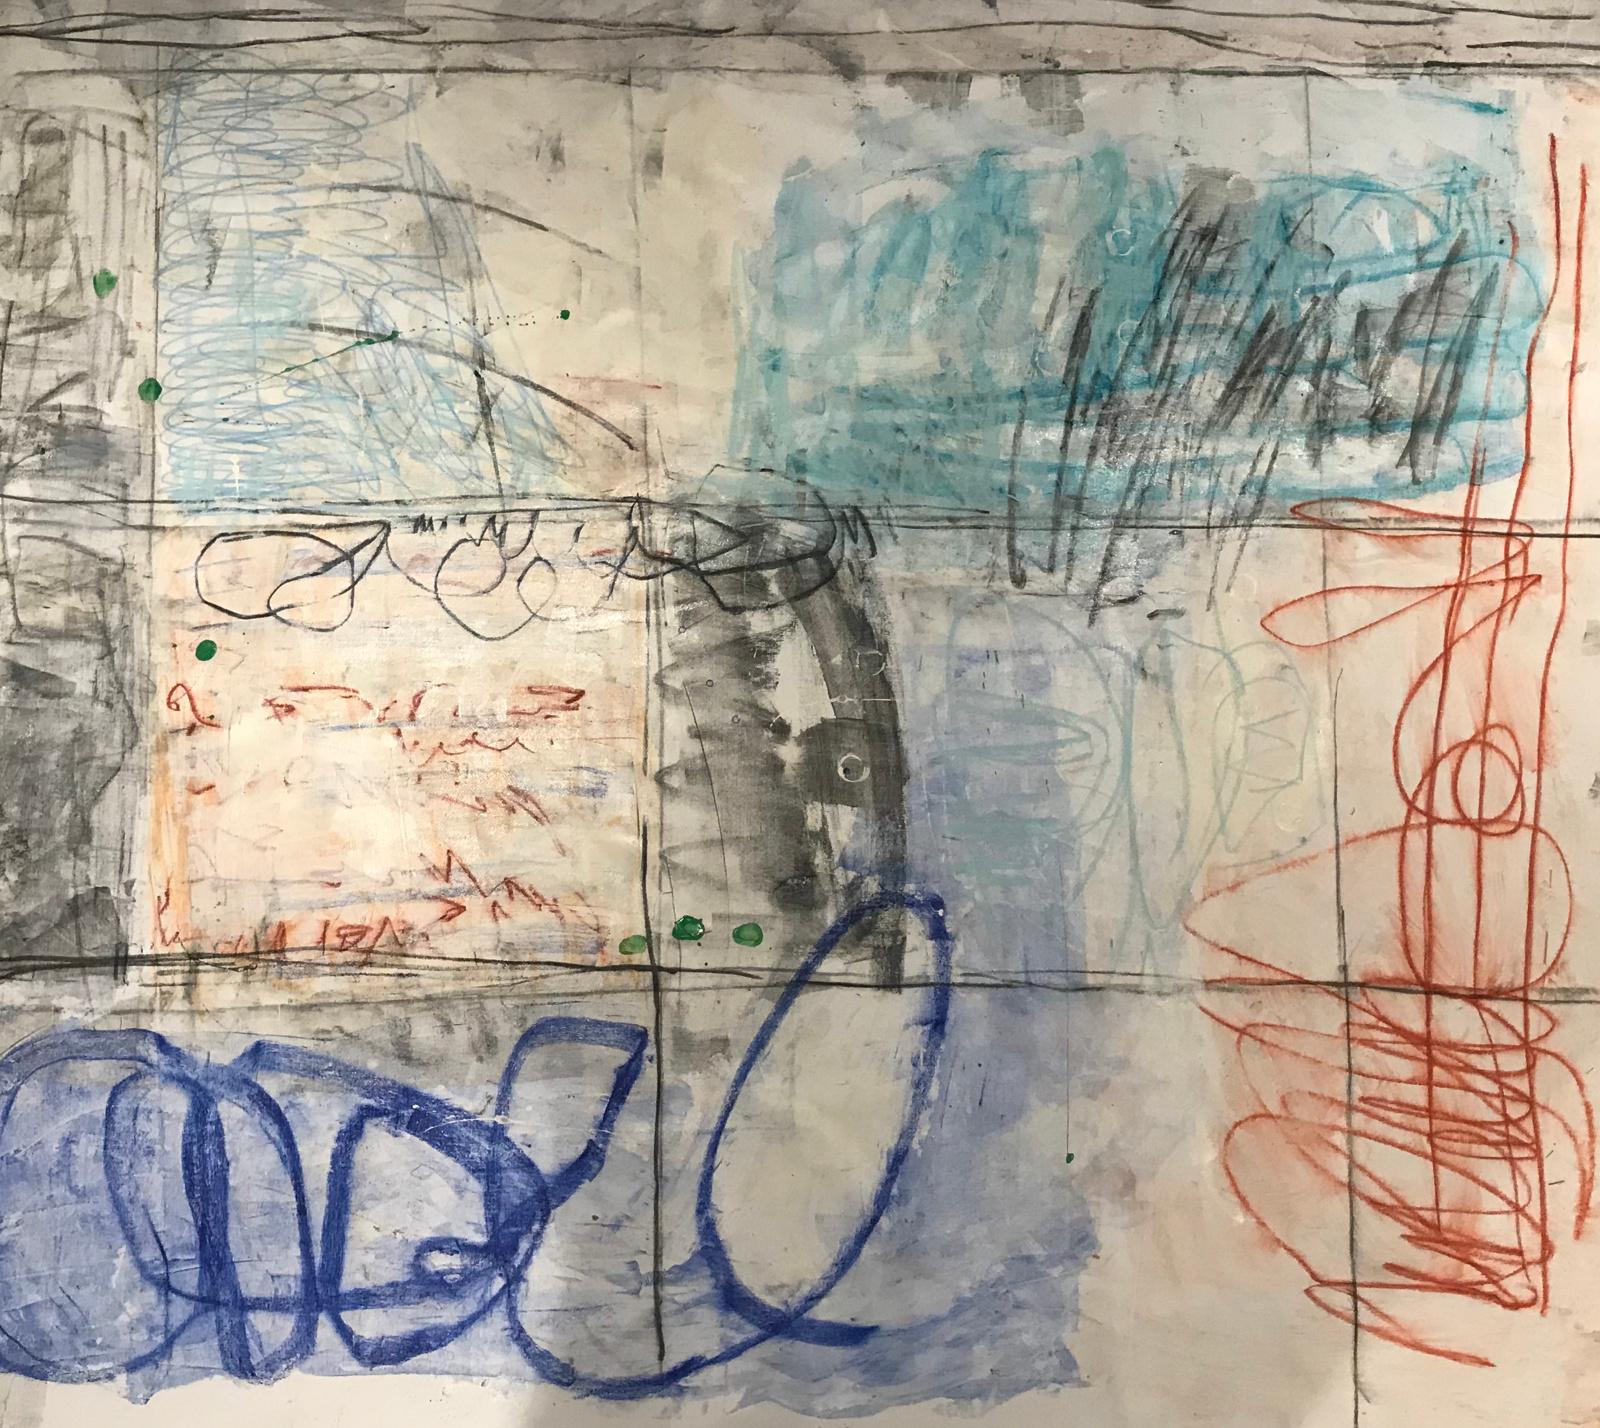 Ashley Chase Andrews Abstract Painting - Handwriting India 2, 2019, Acrylic and Charcoal on Unstretched Canvas, Signed 